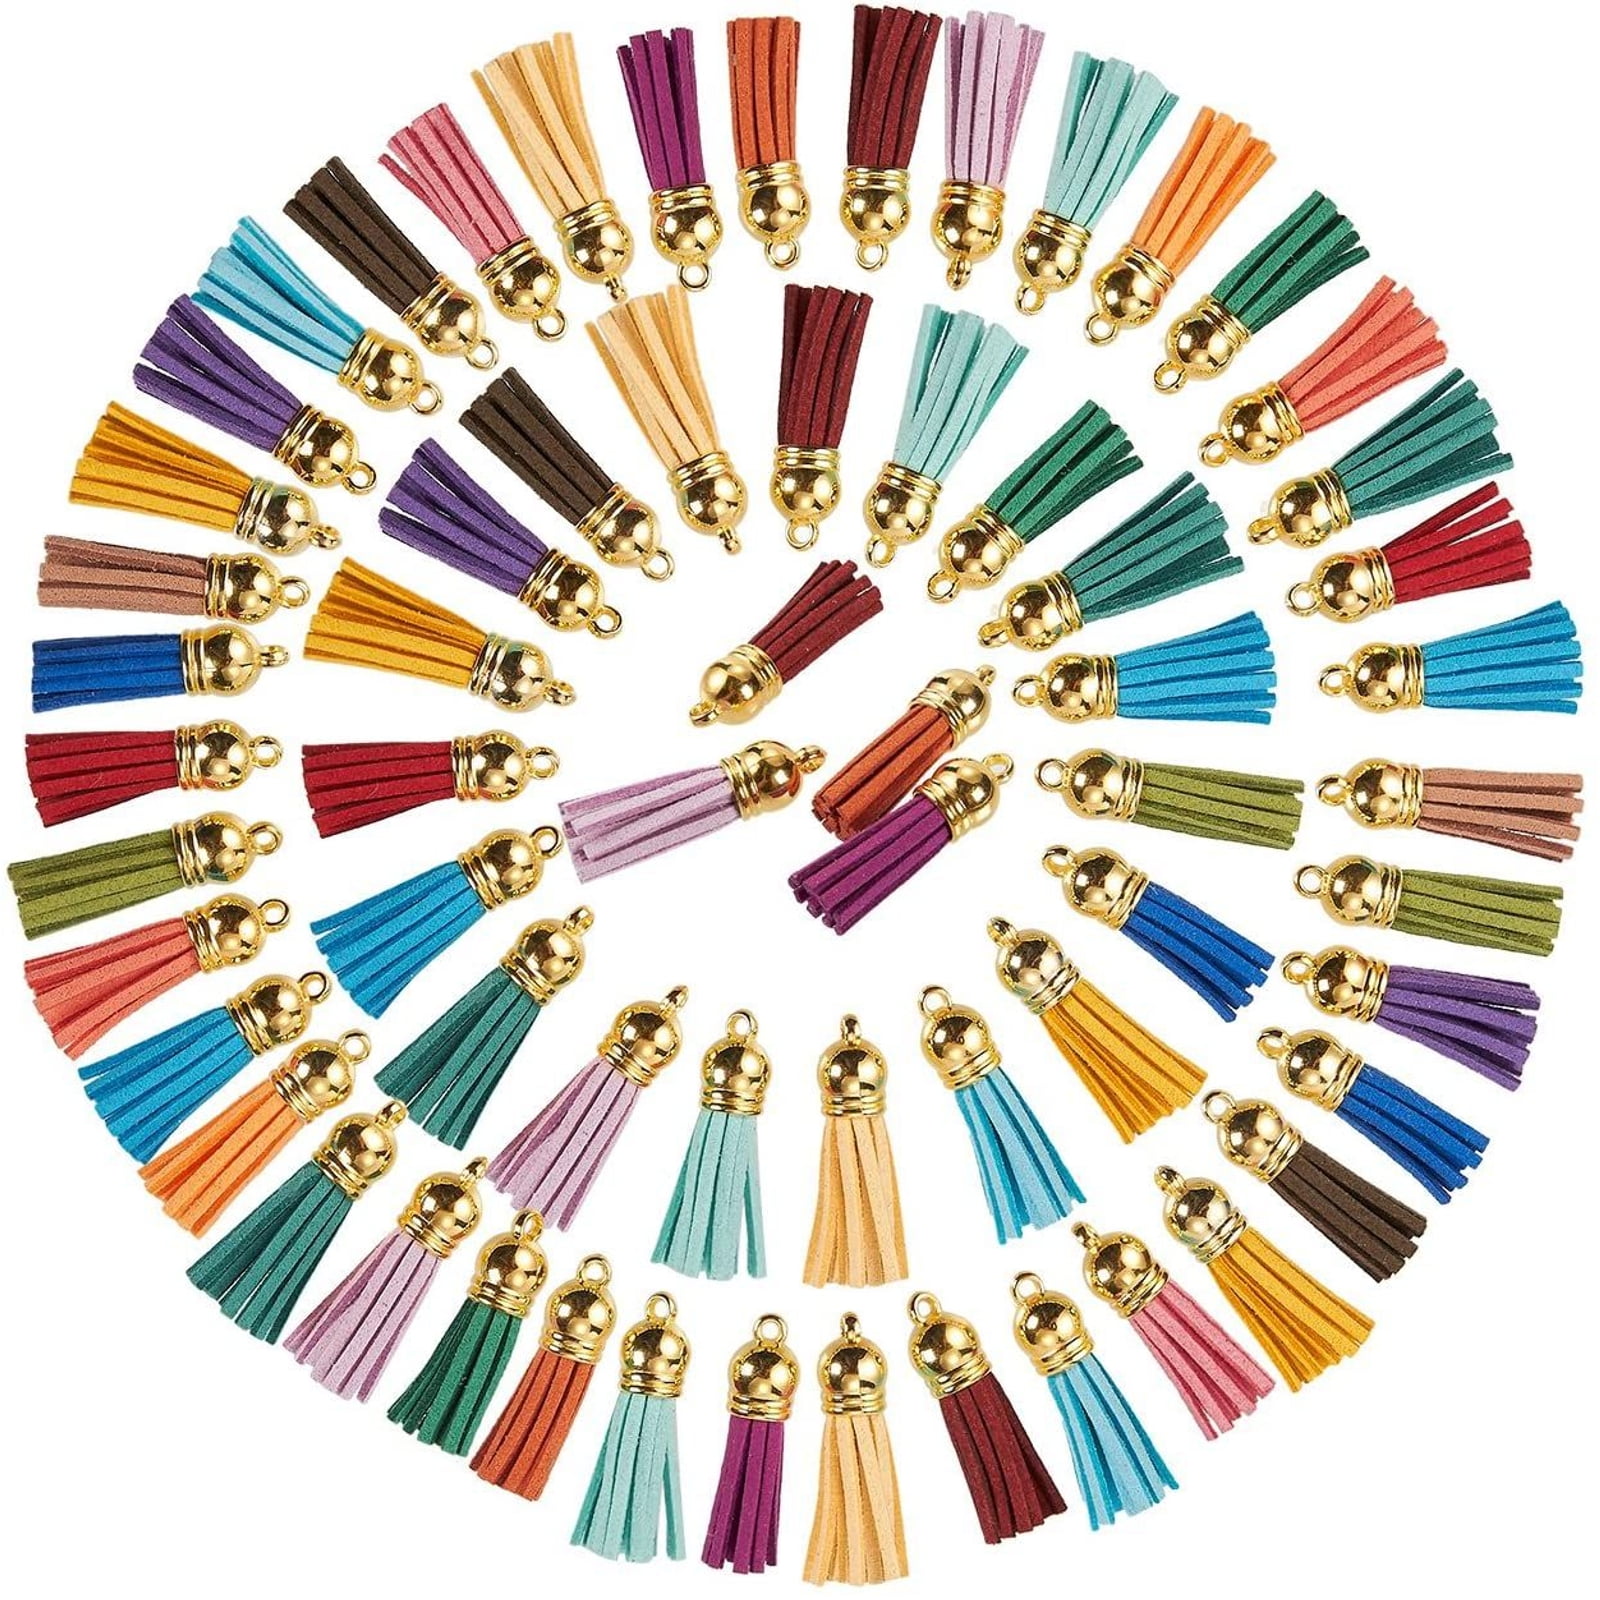 Color Lane Round Pendant Necklace With Mirrors Tassels Pompoms For Women